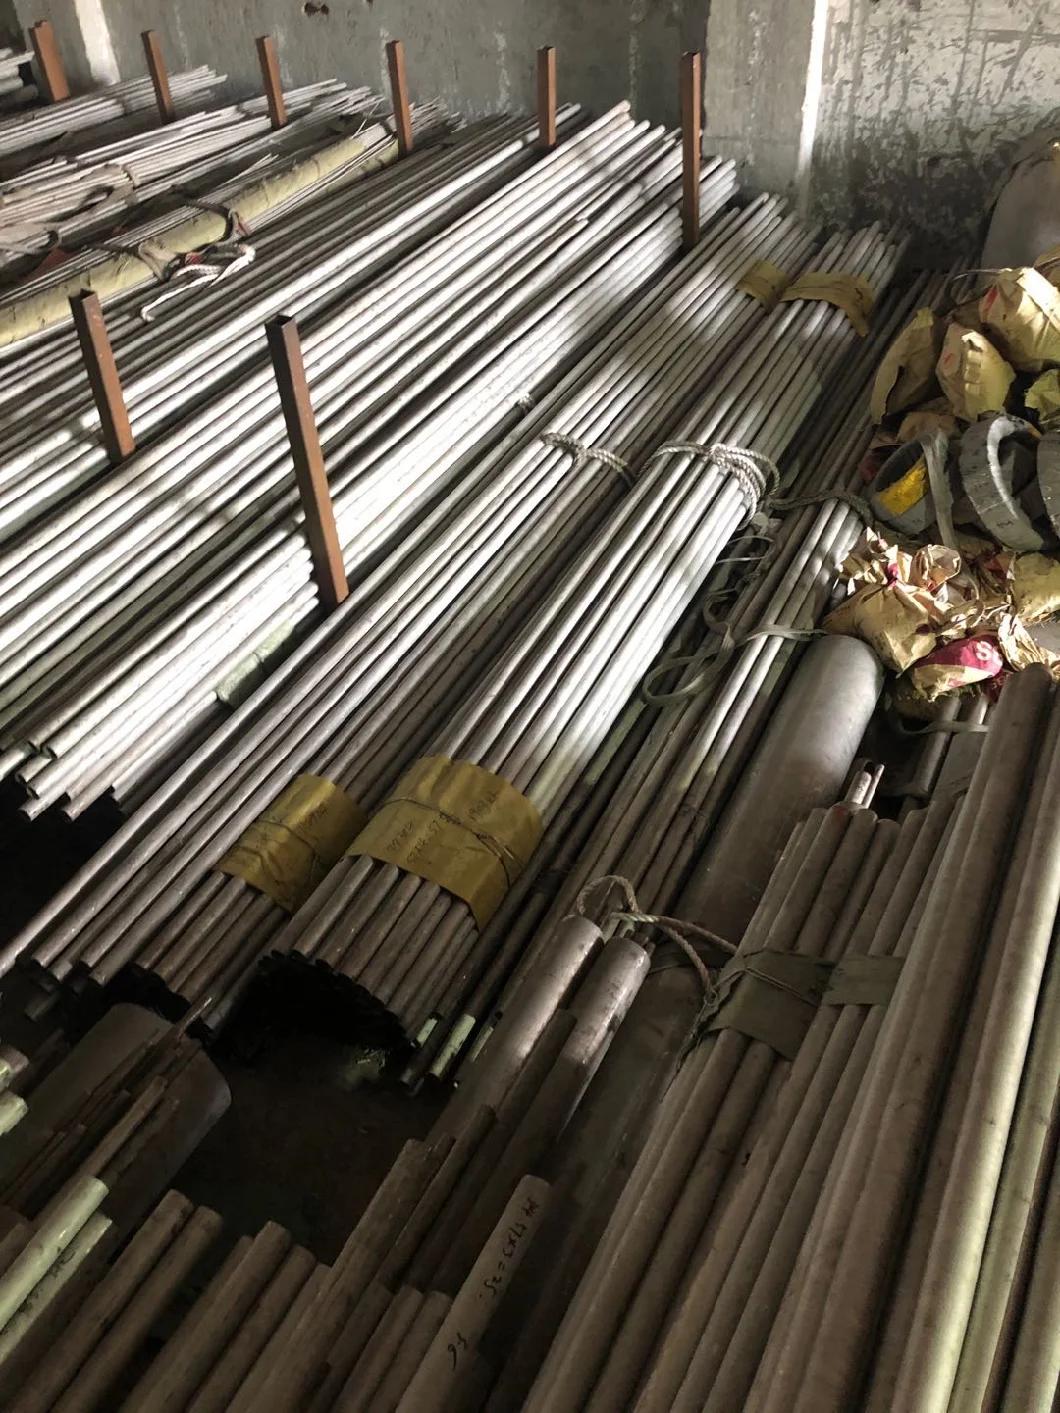 Ethiopia SUS304L Stainless Steel Tube Price From China 316stainless Steel Pipe Manufacturere